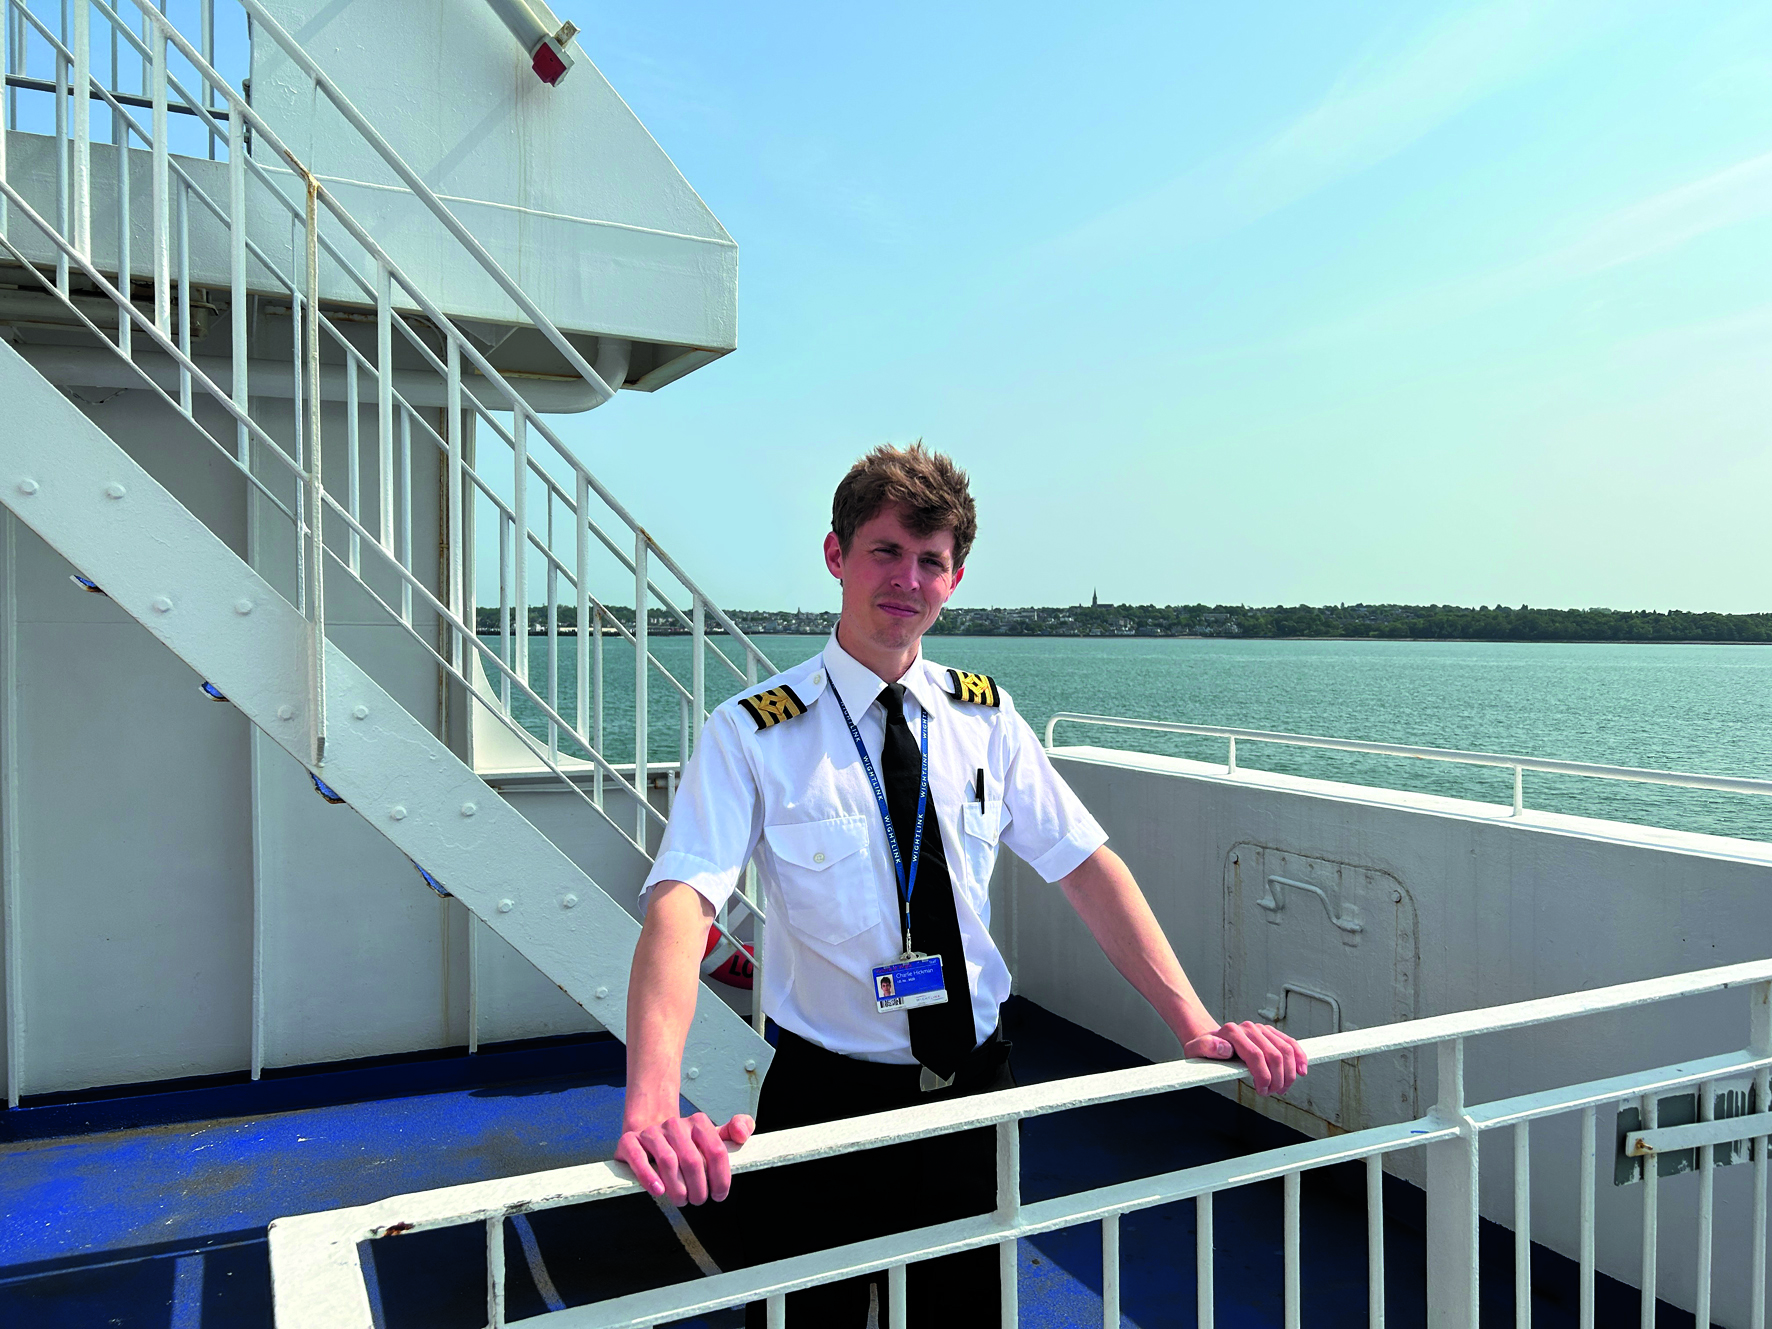 A man in a chief officer's uniform standing on the deck of a ferry at sea